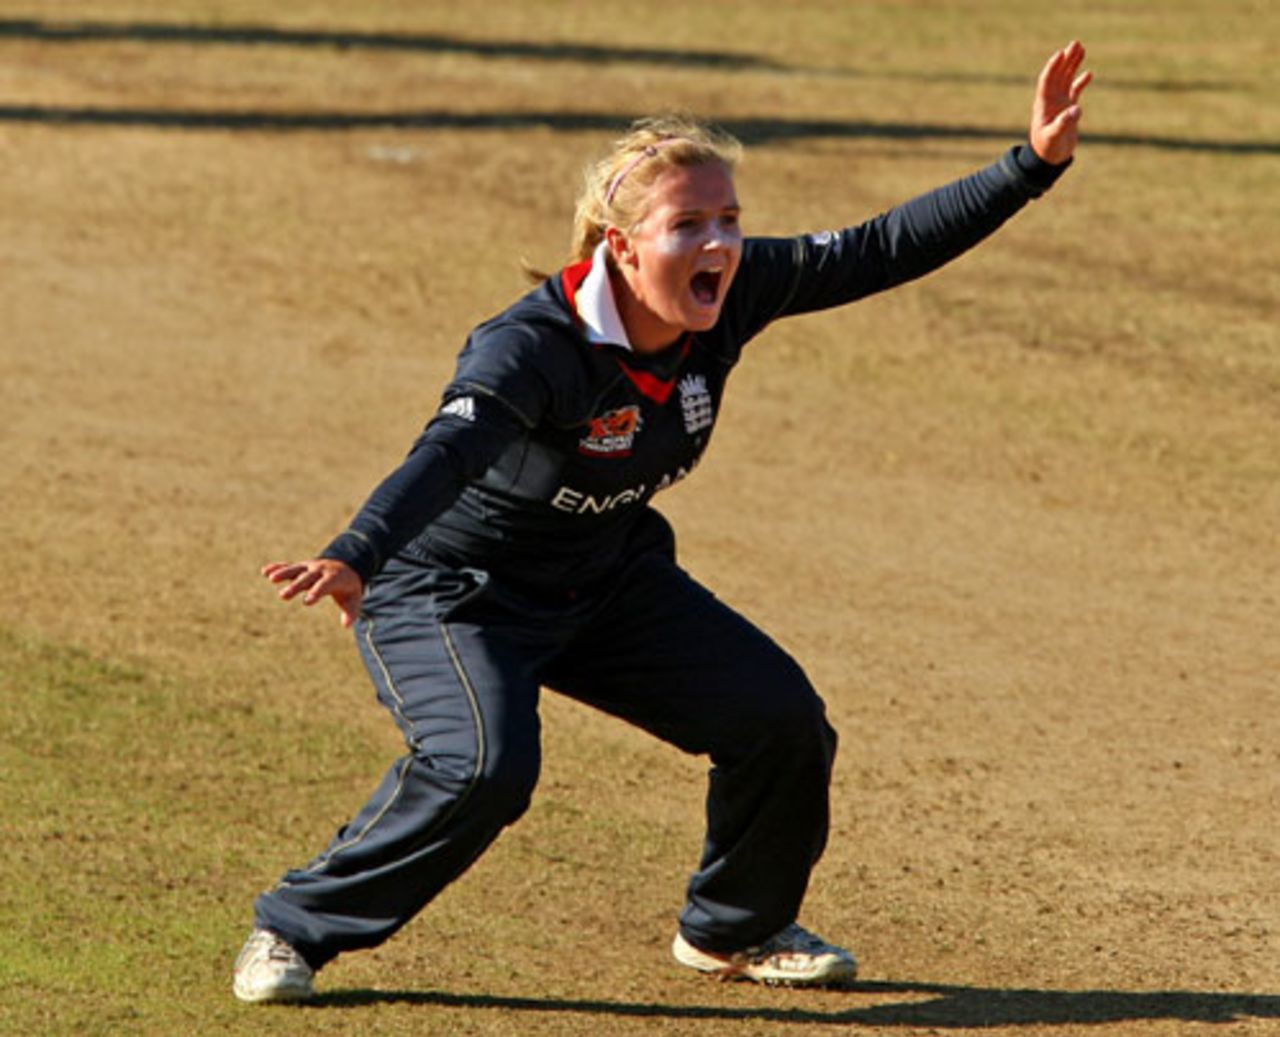 Holly Colvin appeals successfully for an LBW, England v Pakistan, ICC Women's World Twenty20, Taunton, June 16, 2009